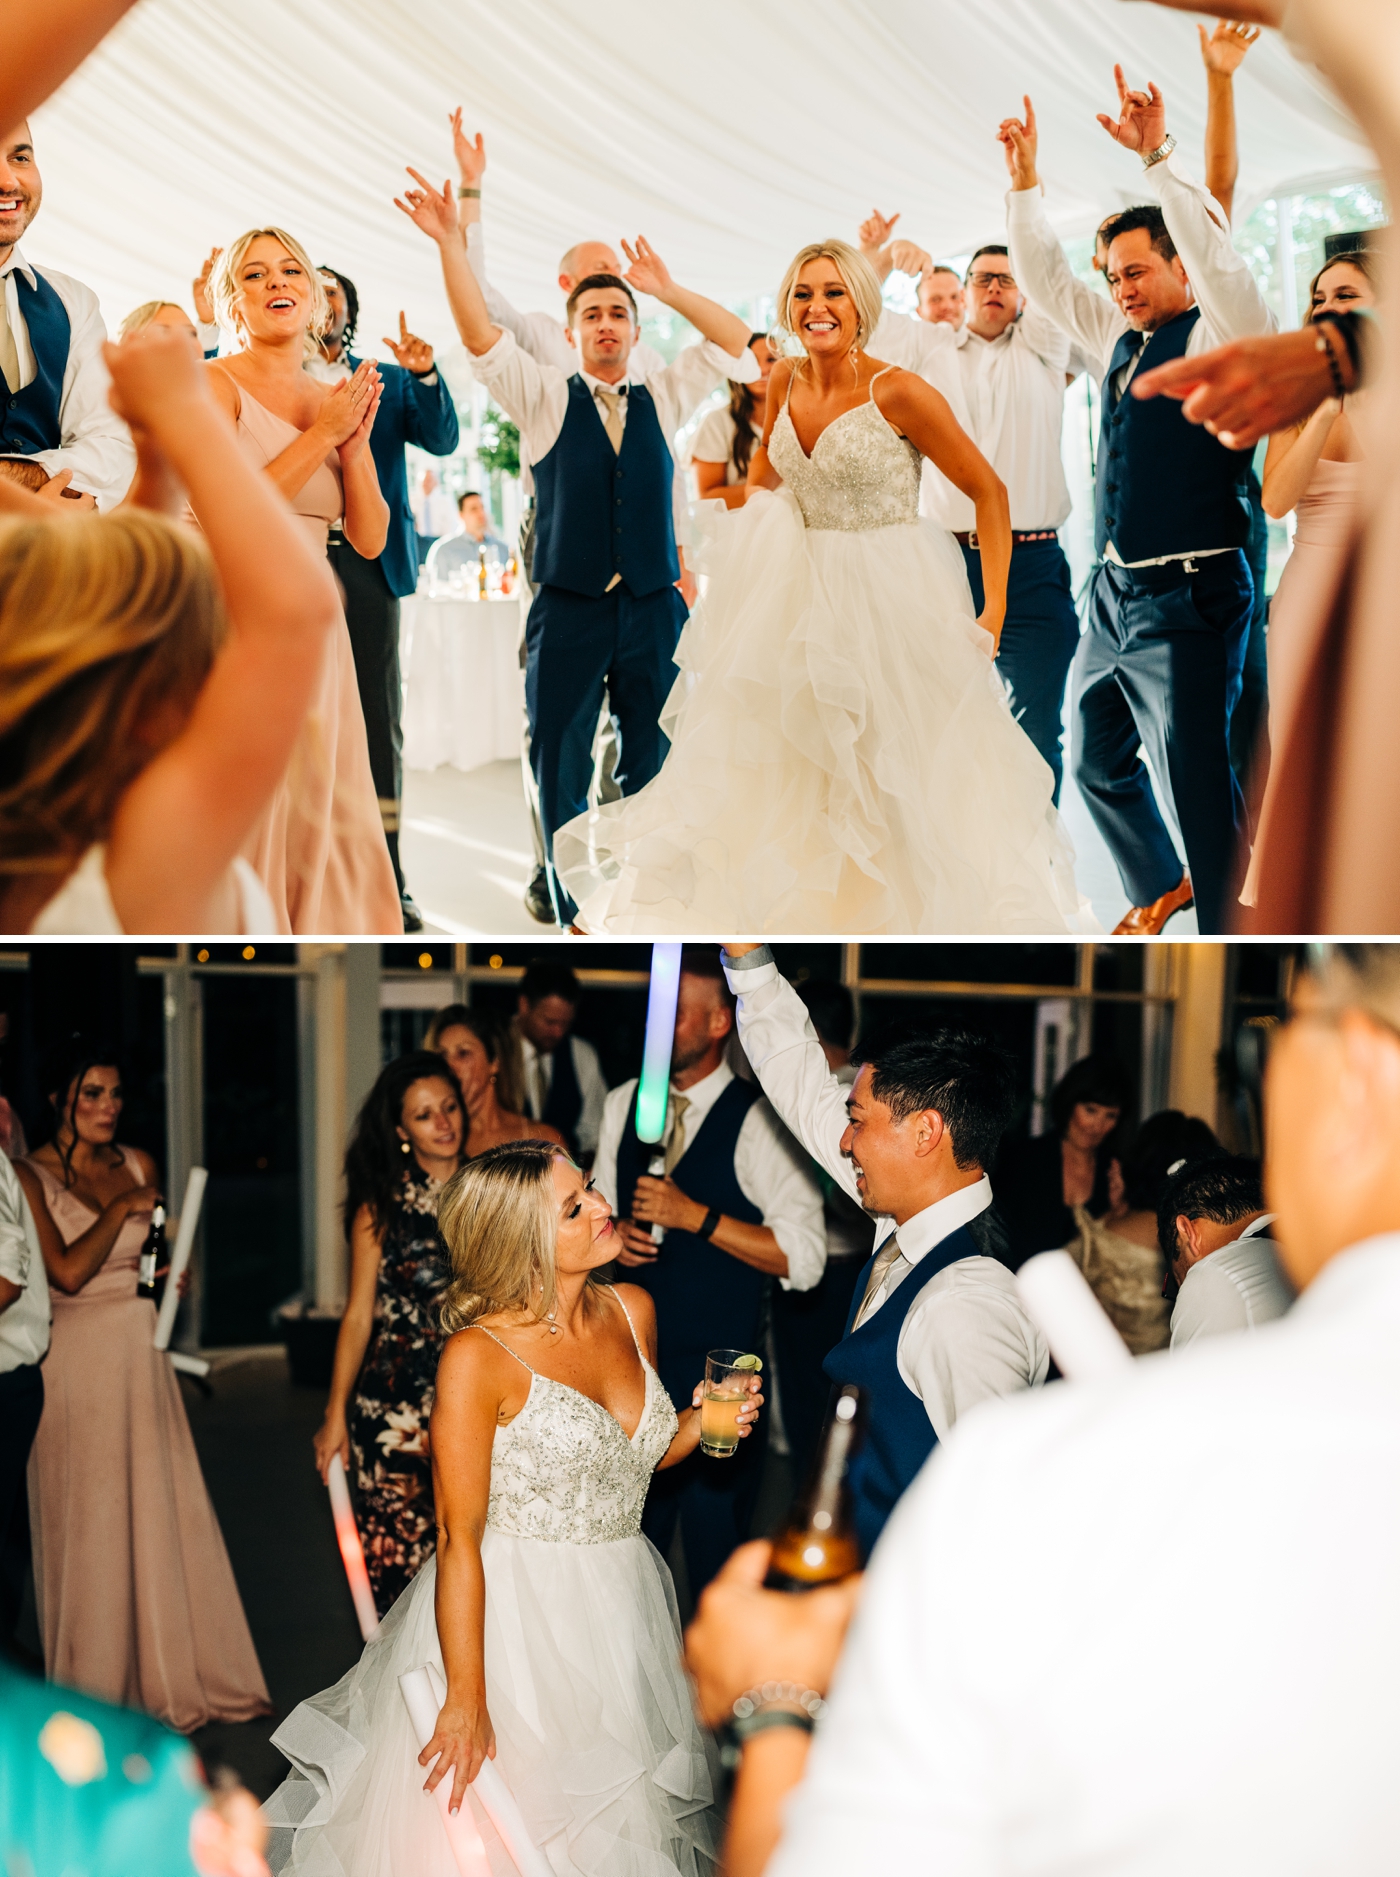 Bride and groom dancing with their guests during wedding reception at the Garden Pavilion